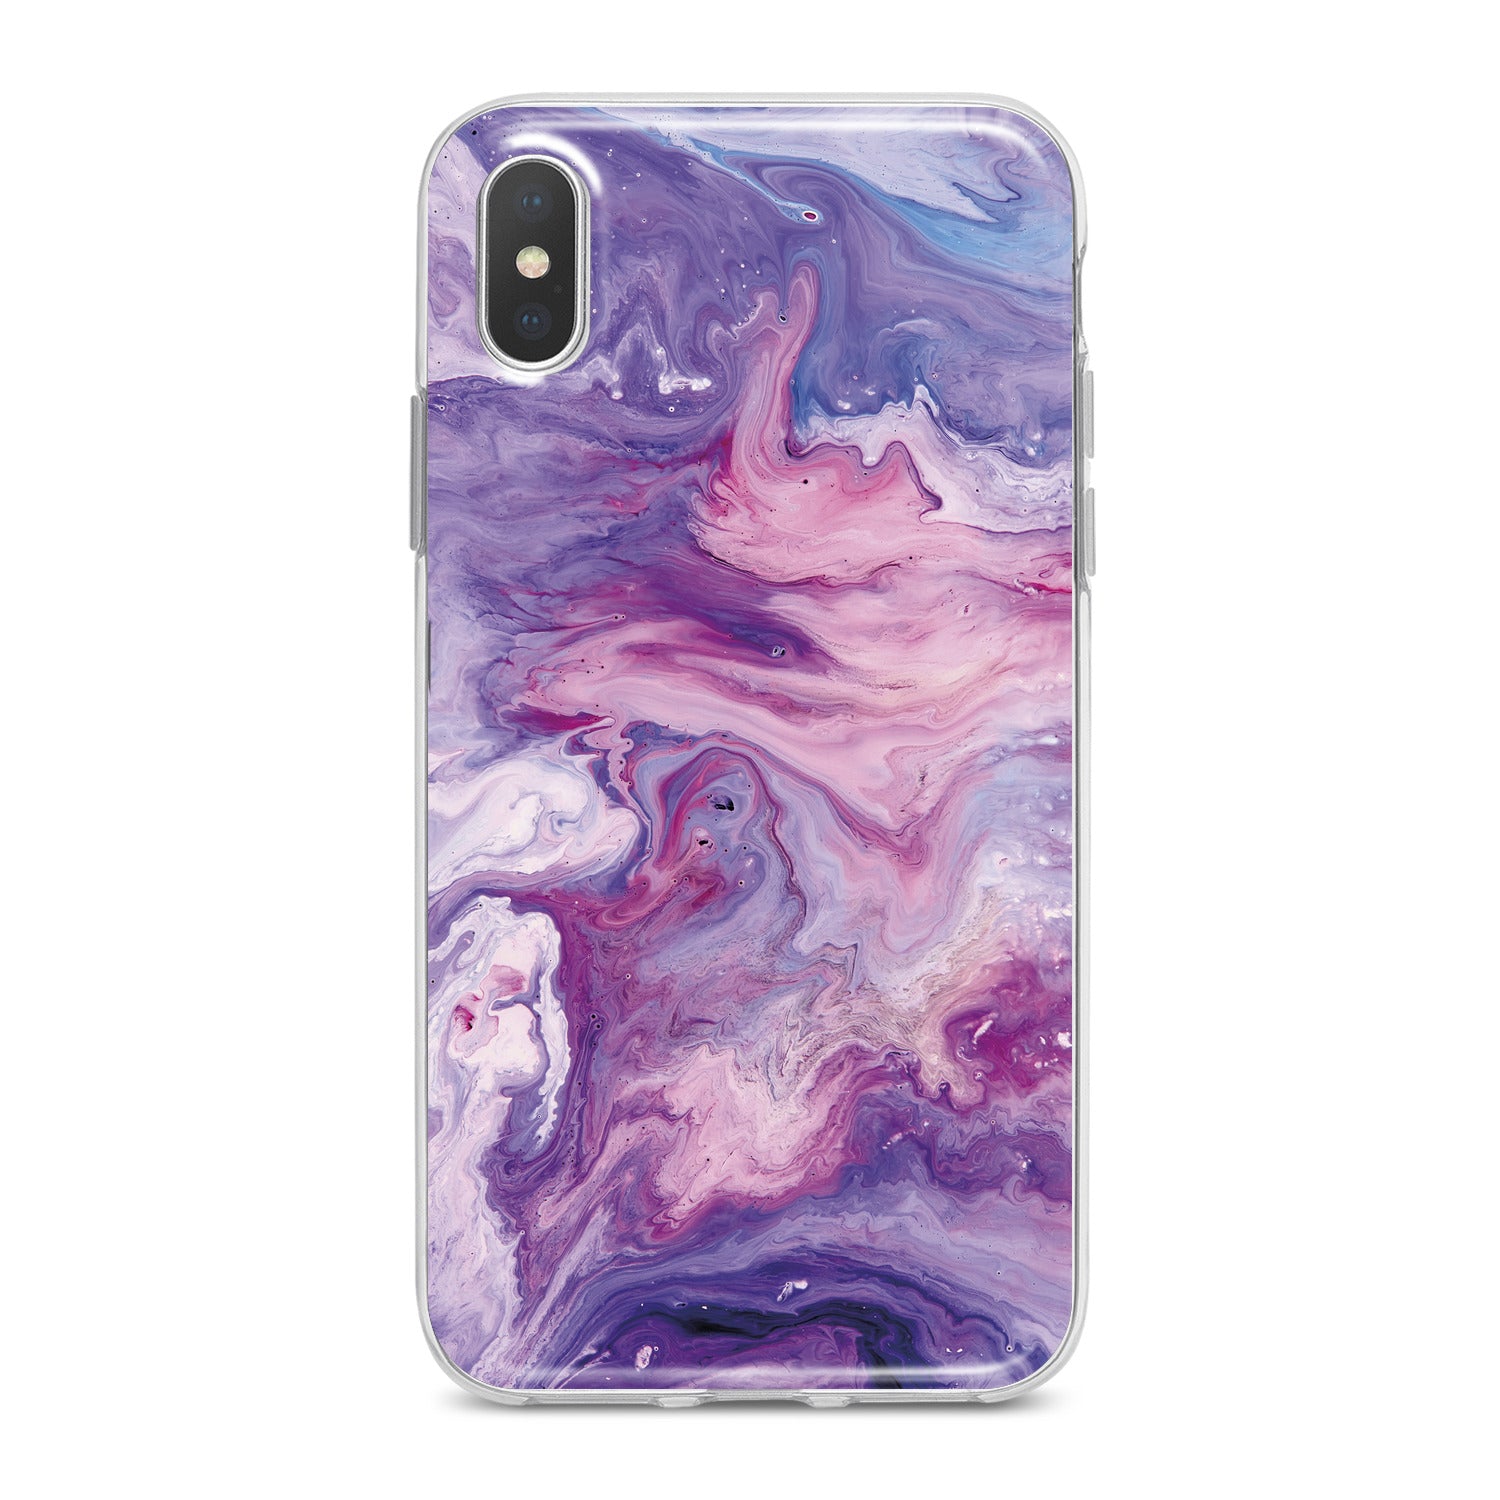 Lex Altern Abstract Violet Print Phone Case for your iPhone & Android phone.